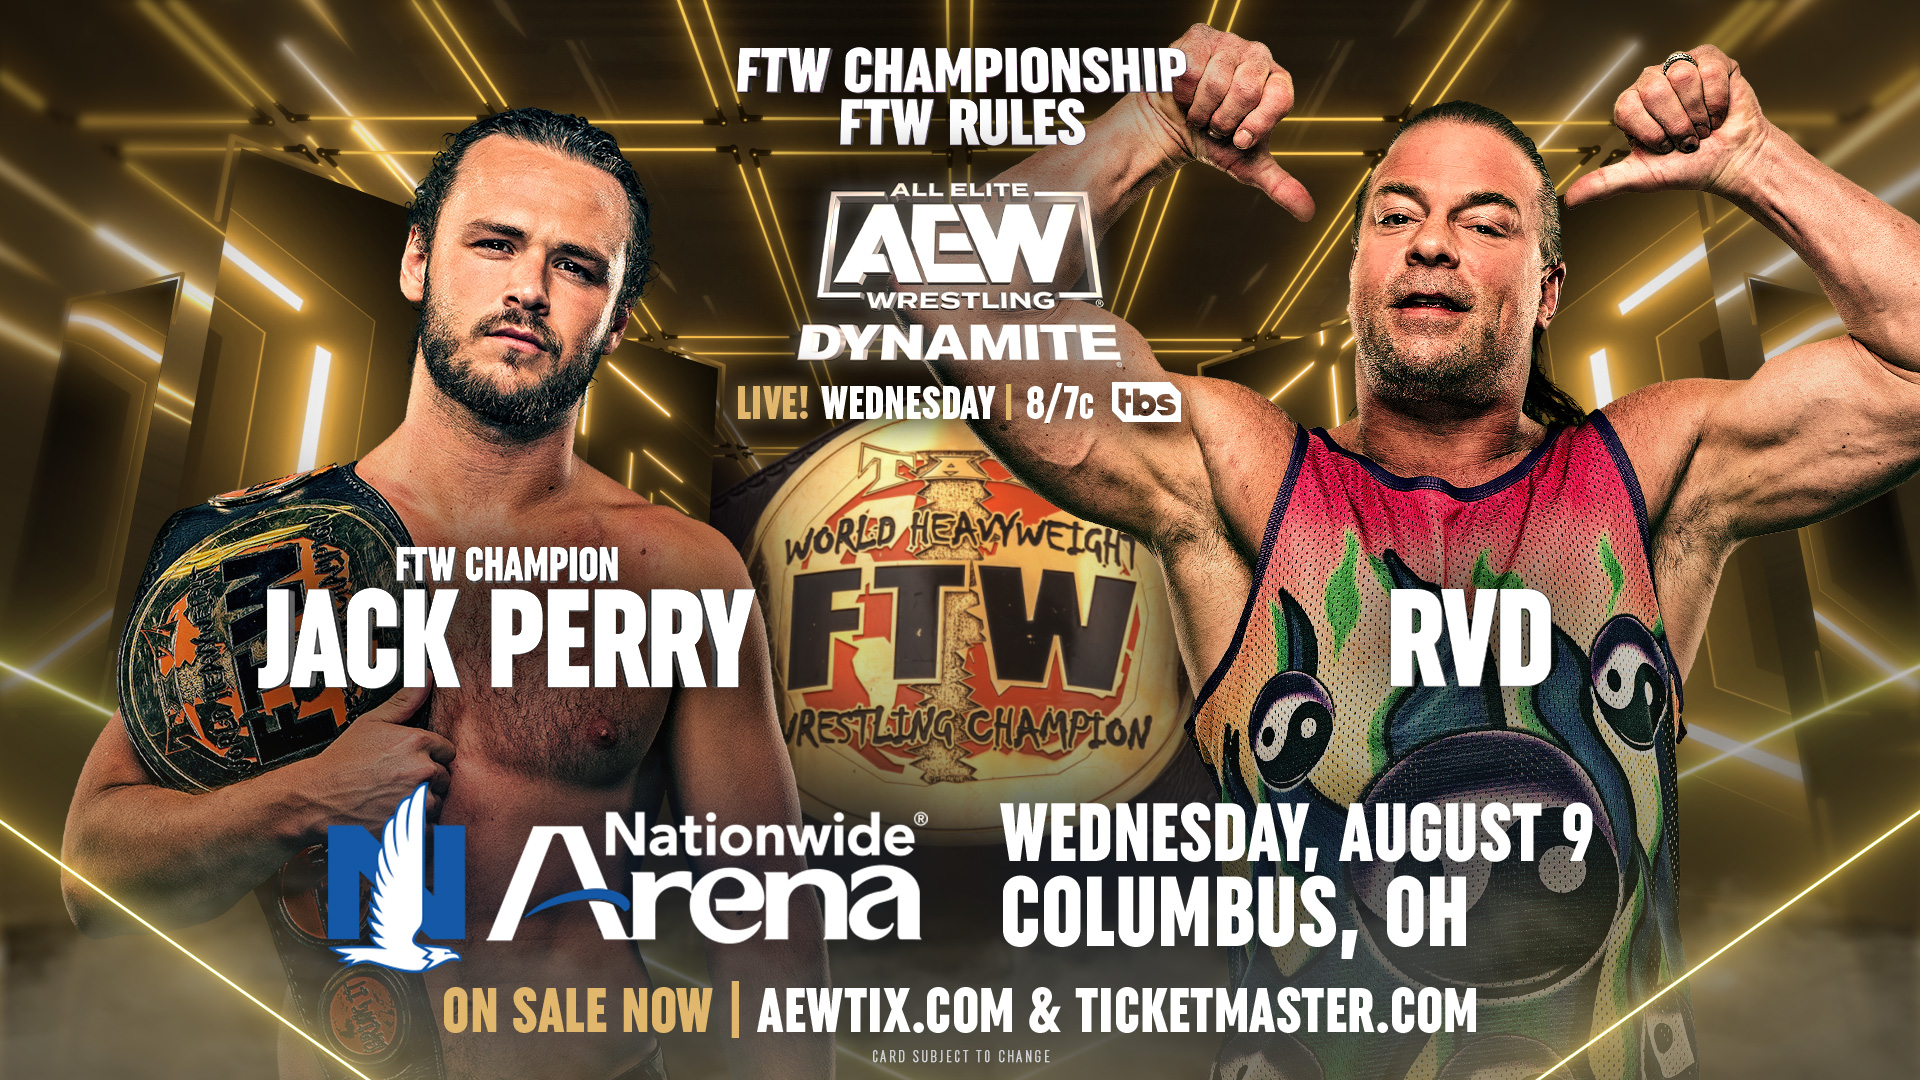 An AEW Dynamite match graphics featuring Jack Perry vs. Rob Van Dam.